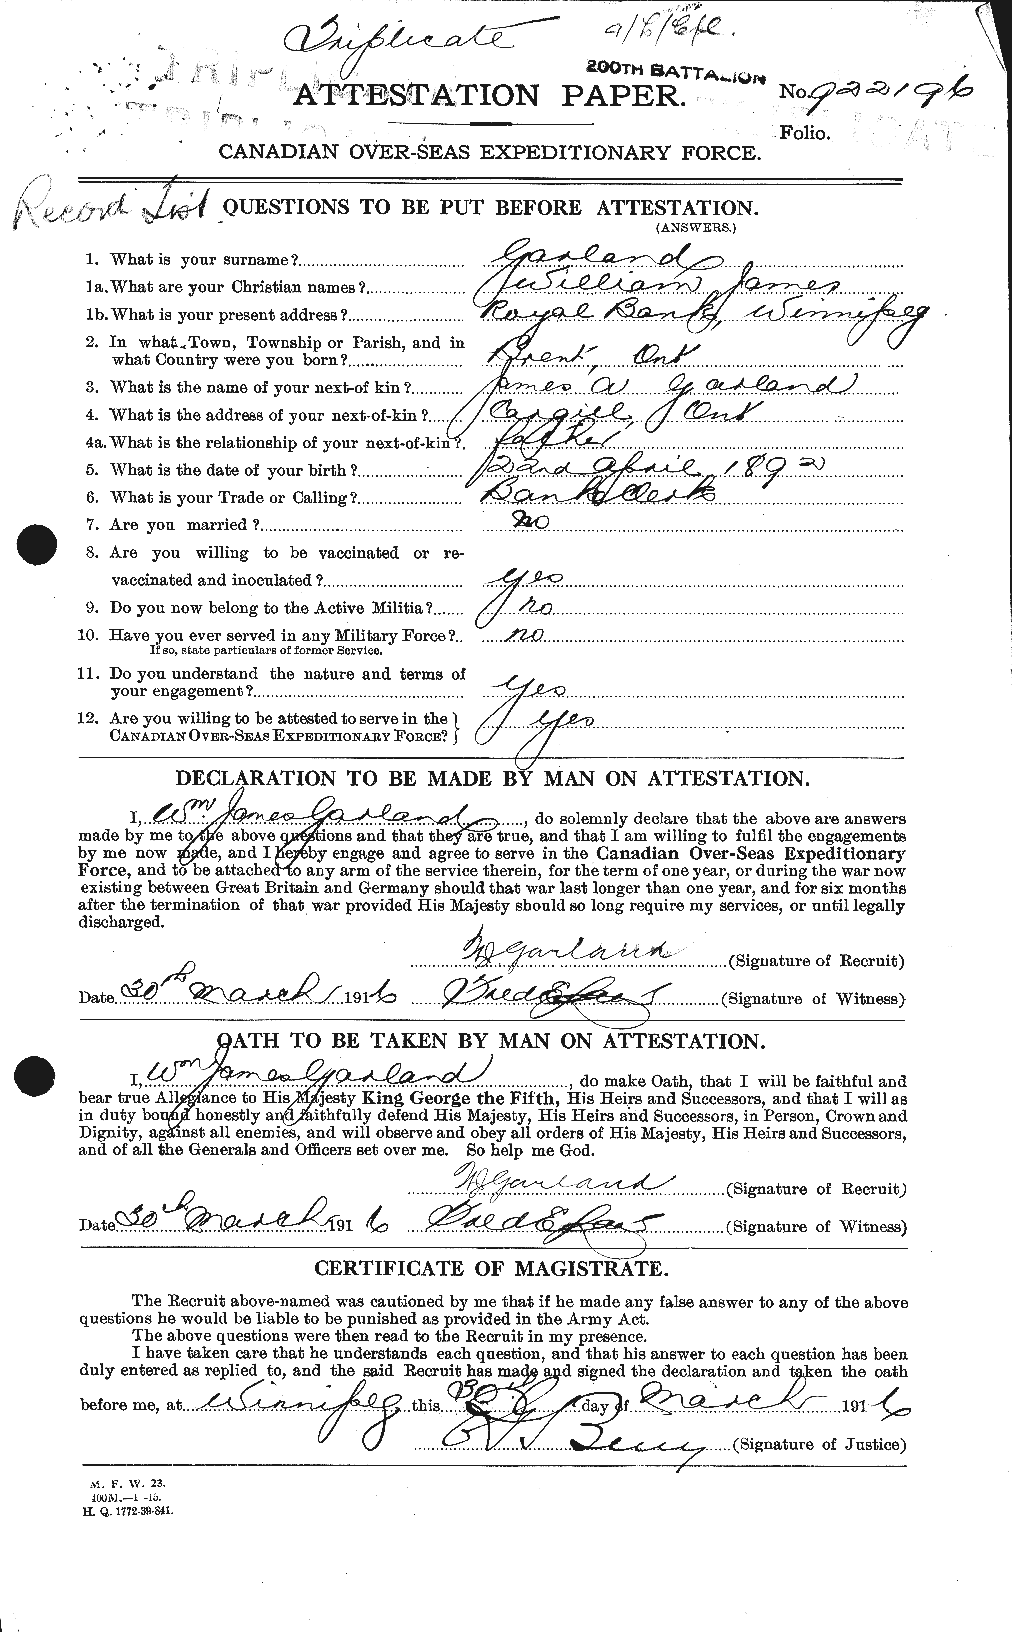 Personnel Records of the First World War - CEF 343995a